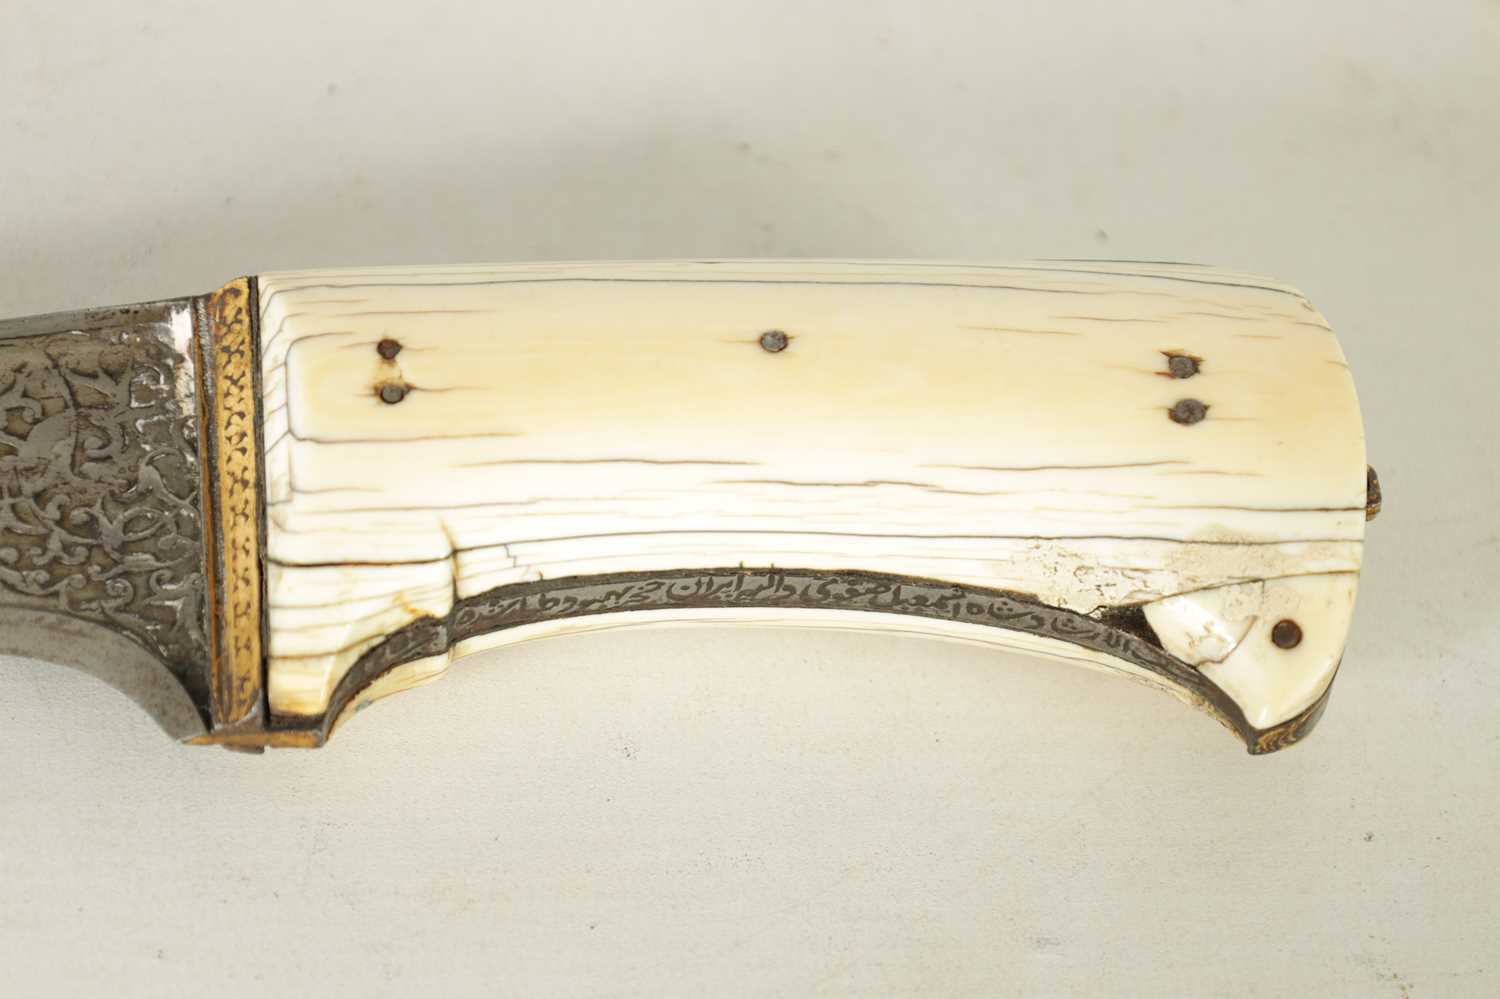 A FINE LATE 18TH/EARLY 19TH CENTURY MUGHAL MARINE IVORY - HILTED GOLD INLAID PESH KABZ DAGGER - Image 3 of 13